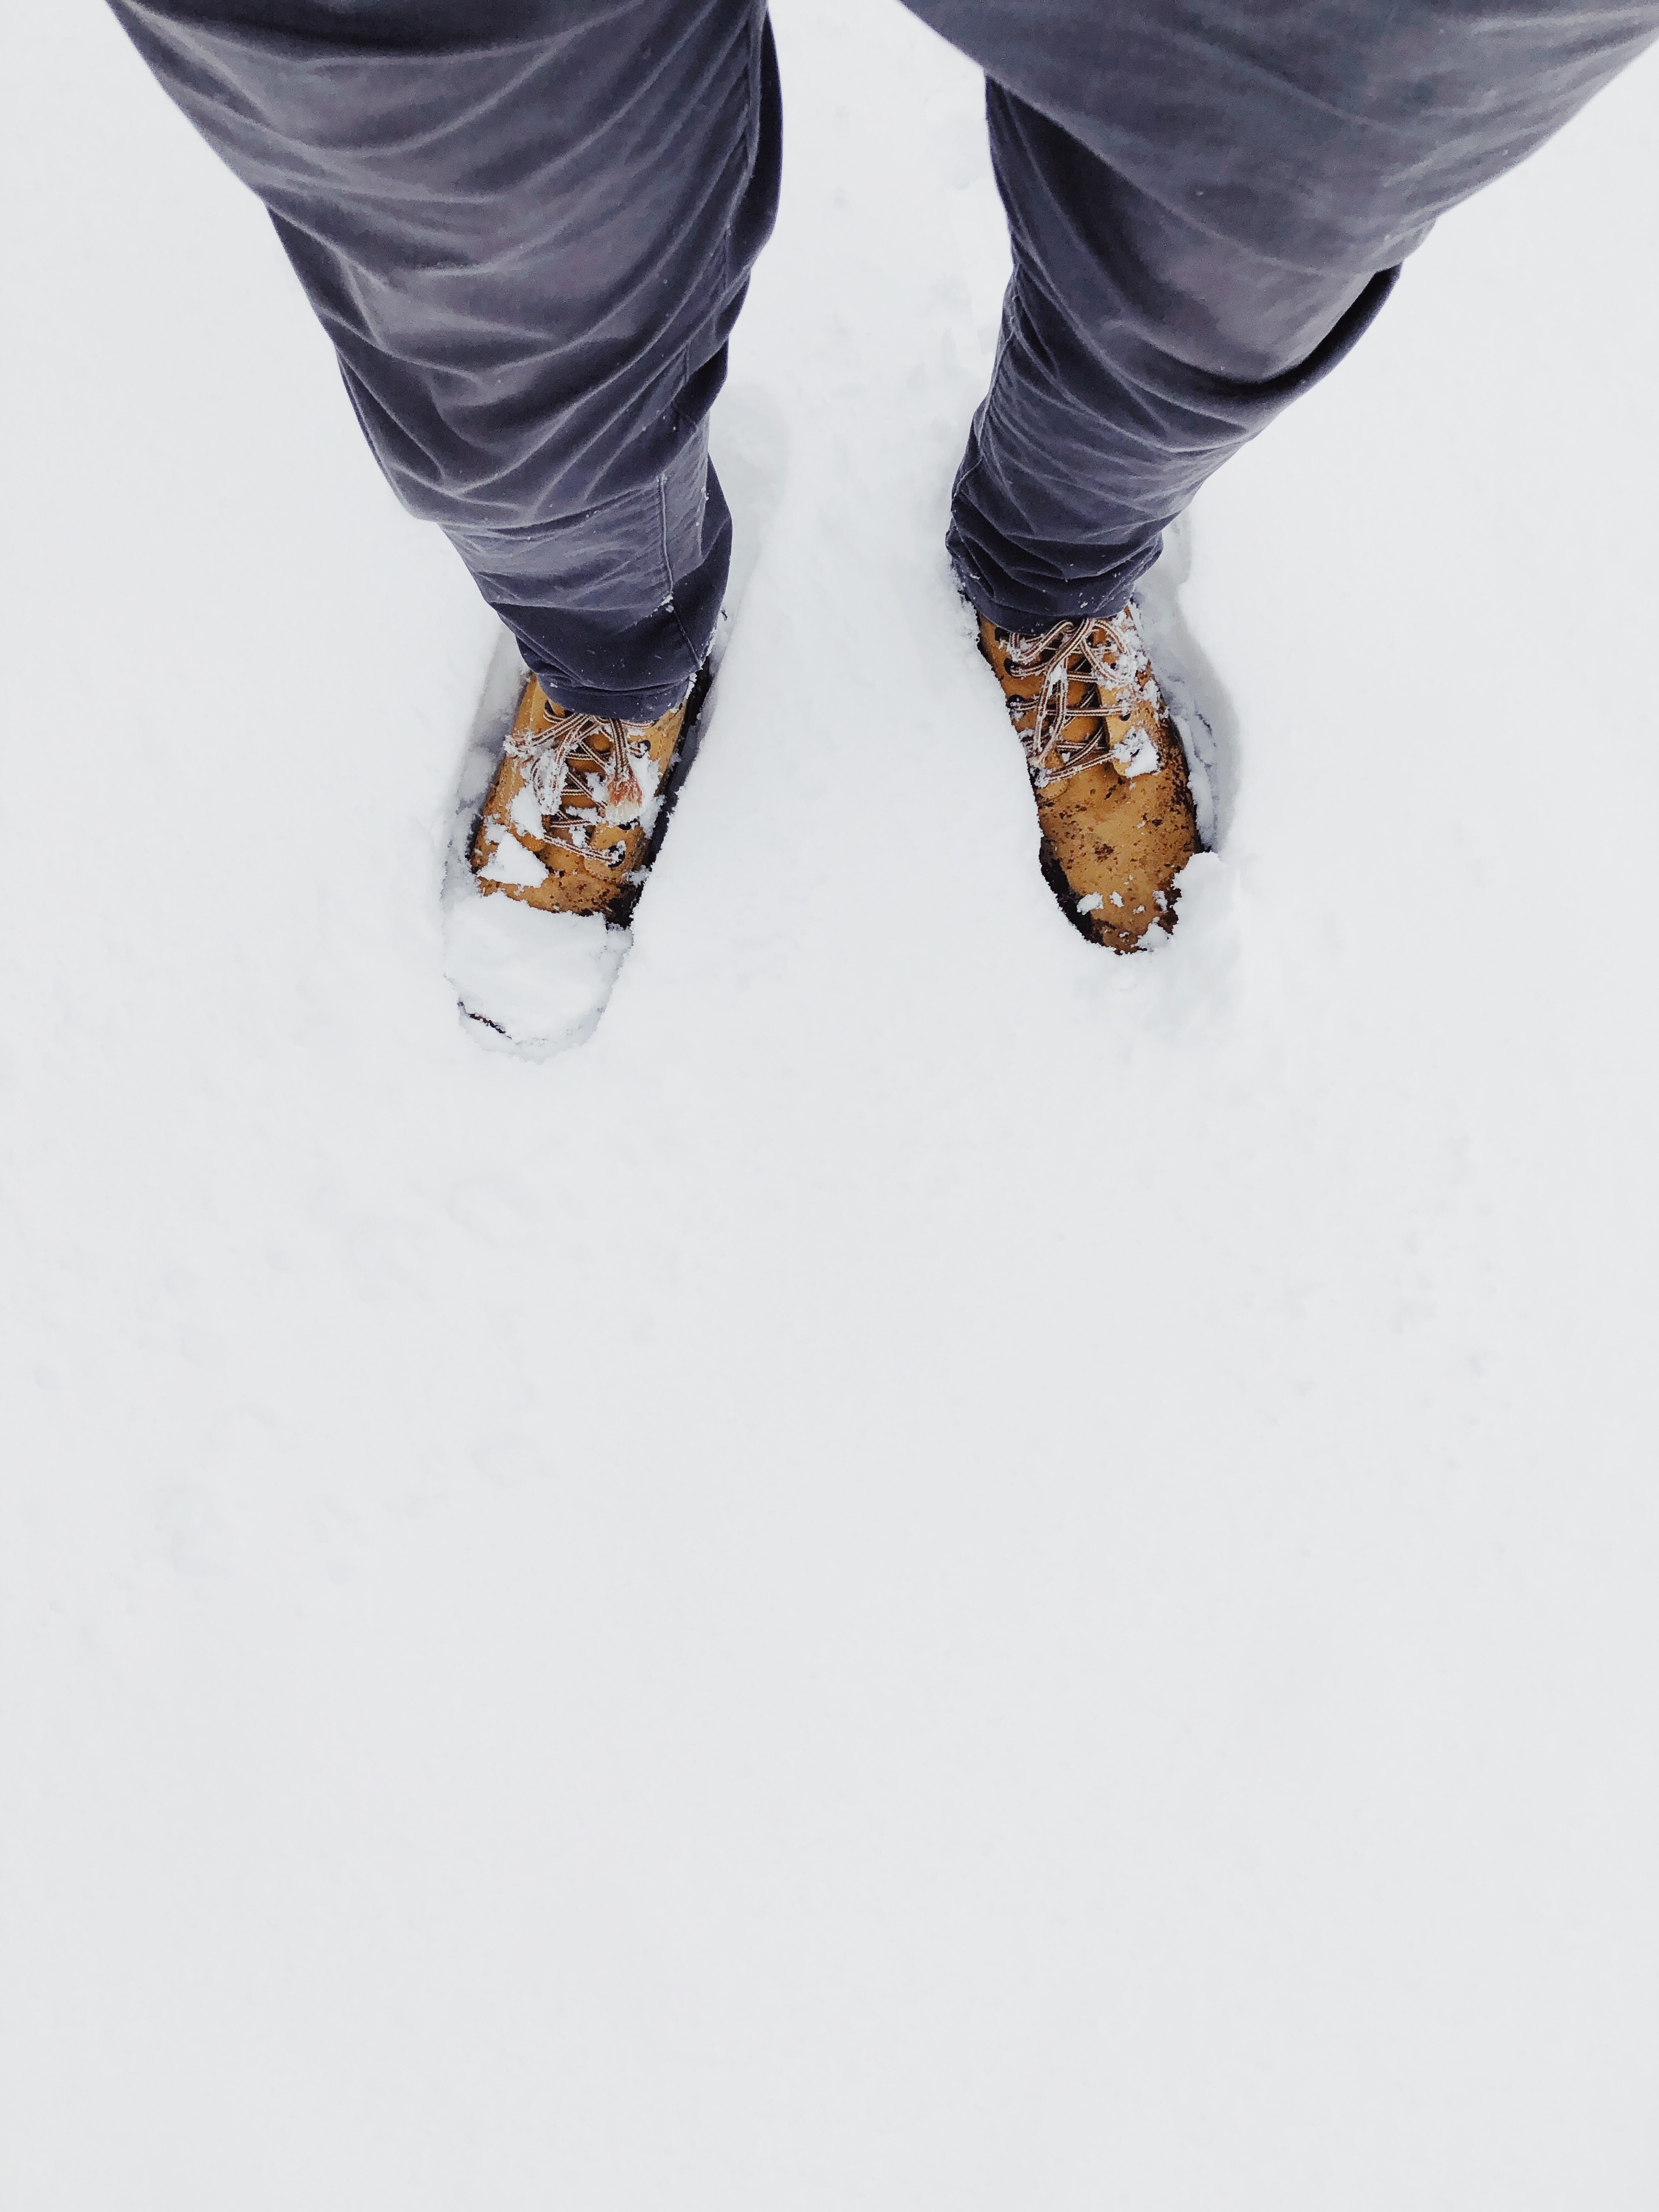 The two feet of a Young adult wearing laced boots in about 3 inches of snow.